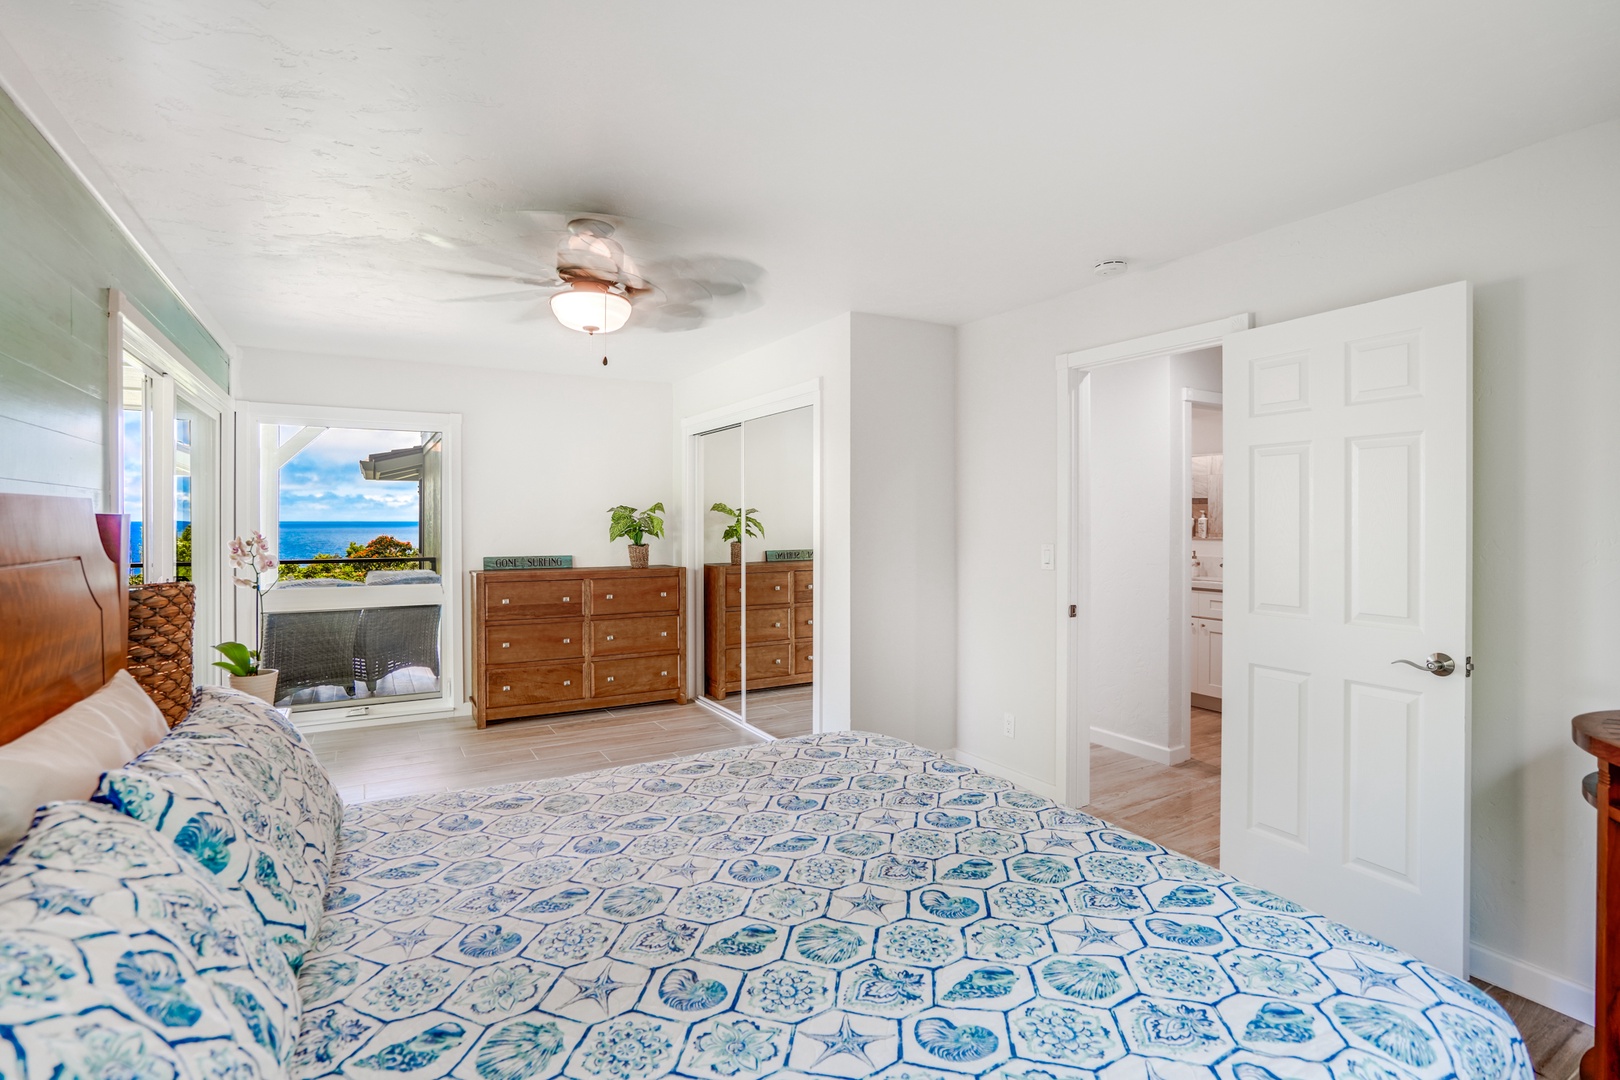 Princeville Vacation Rentals, Wai Lani - Guest suite 1 with a plush queen bed and private lanai.